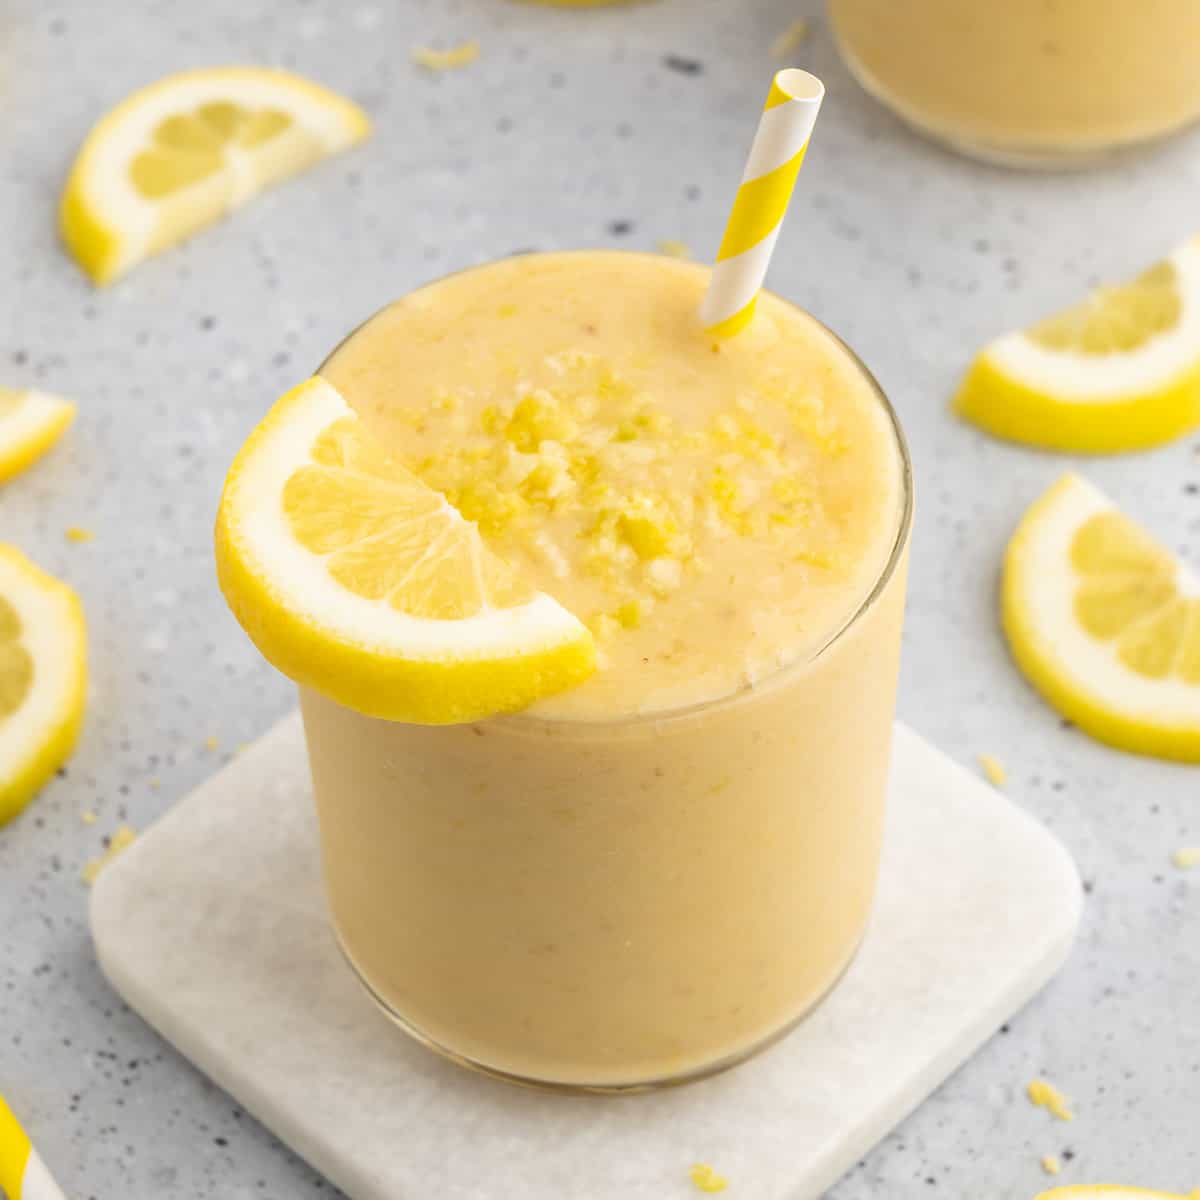 Lemon juice in a small glass with straw and topped with lemon zest and a lemon slice.